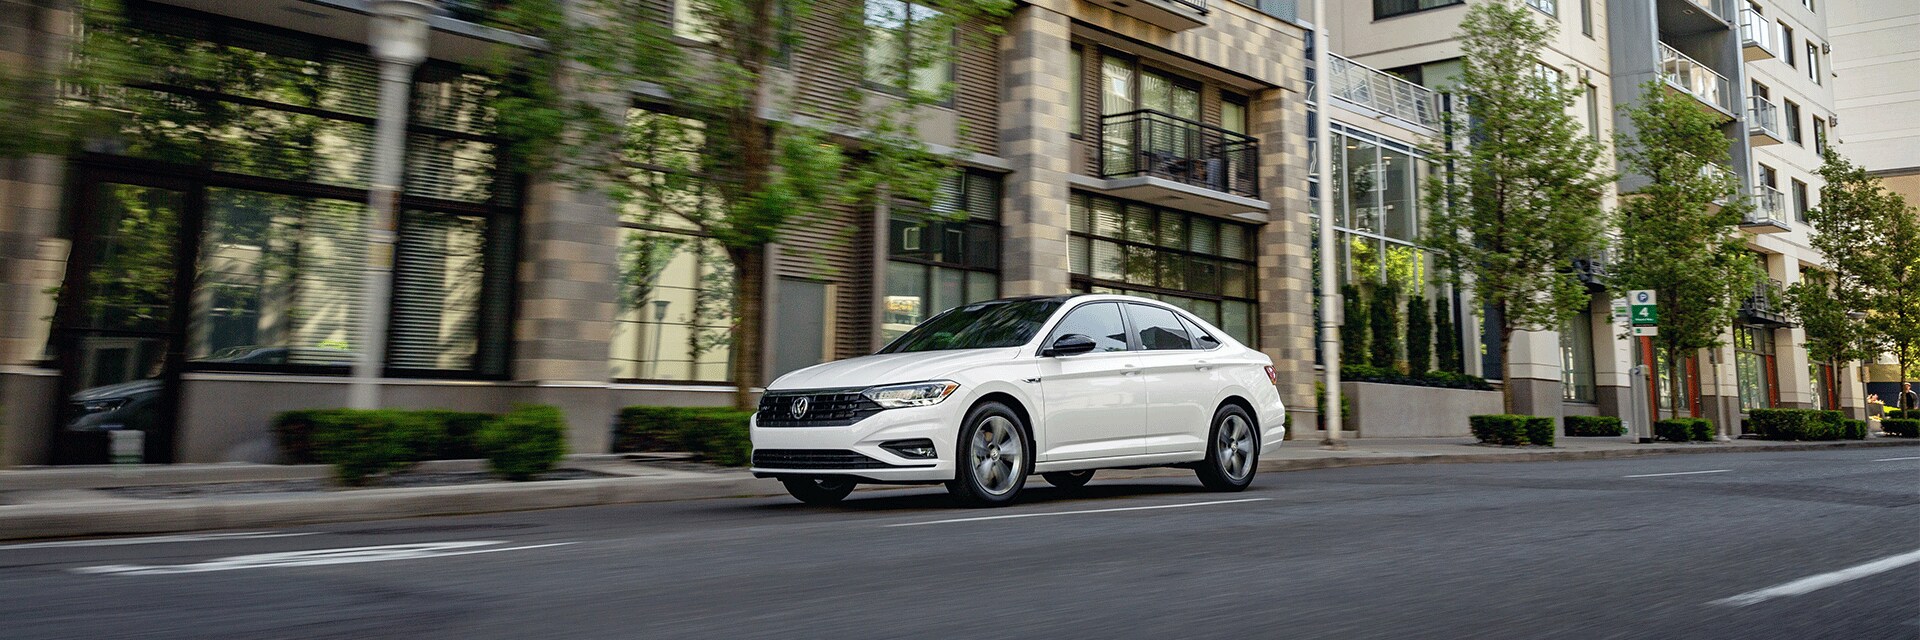 Things to Check When Buying a Used Car | West Broad Volkswagen in Richmond, VA | White 2021 Volkswagen Jetta Facing Left Driving on Road in City with Trees Lining Sidewalks